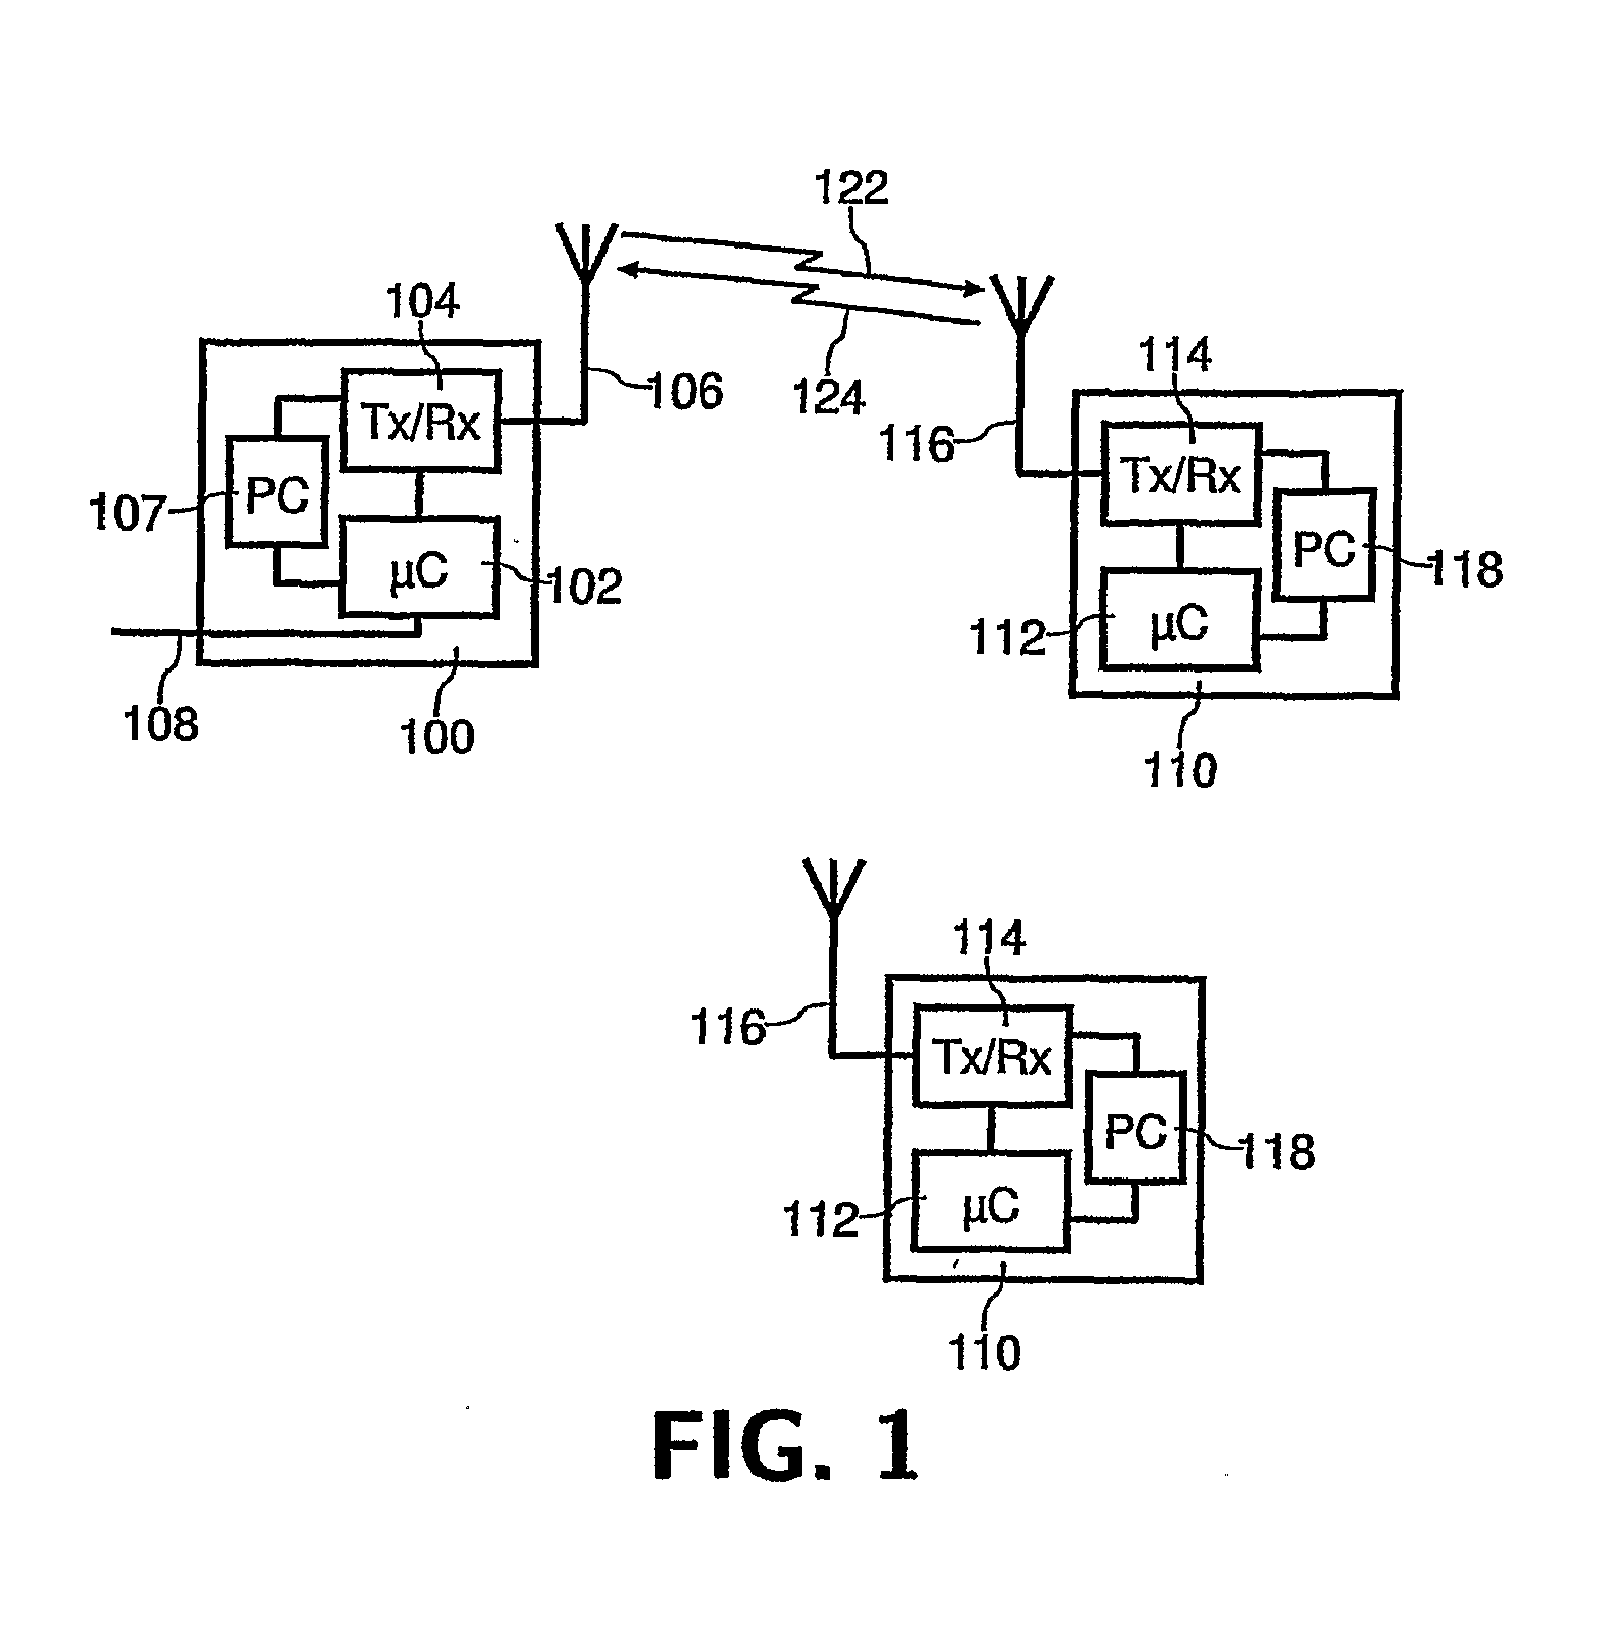 Method for communicating in a mobile network implementing discontinuous reception